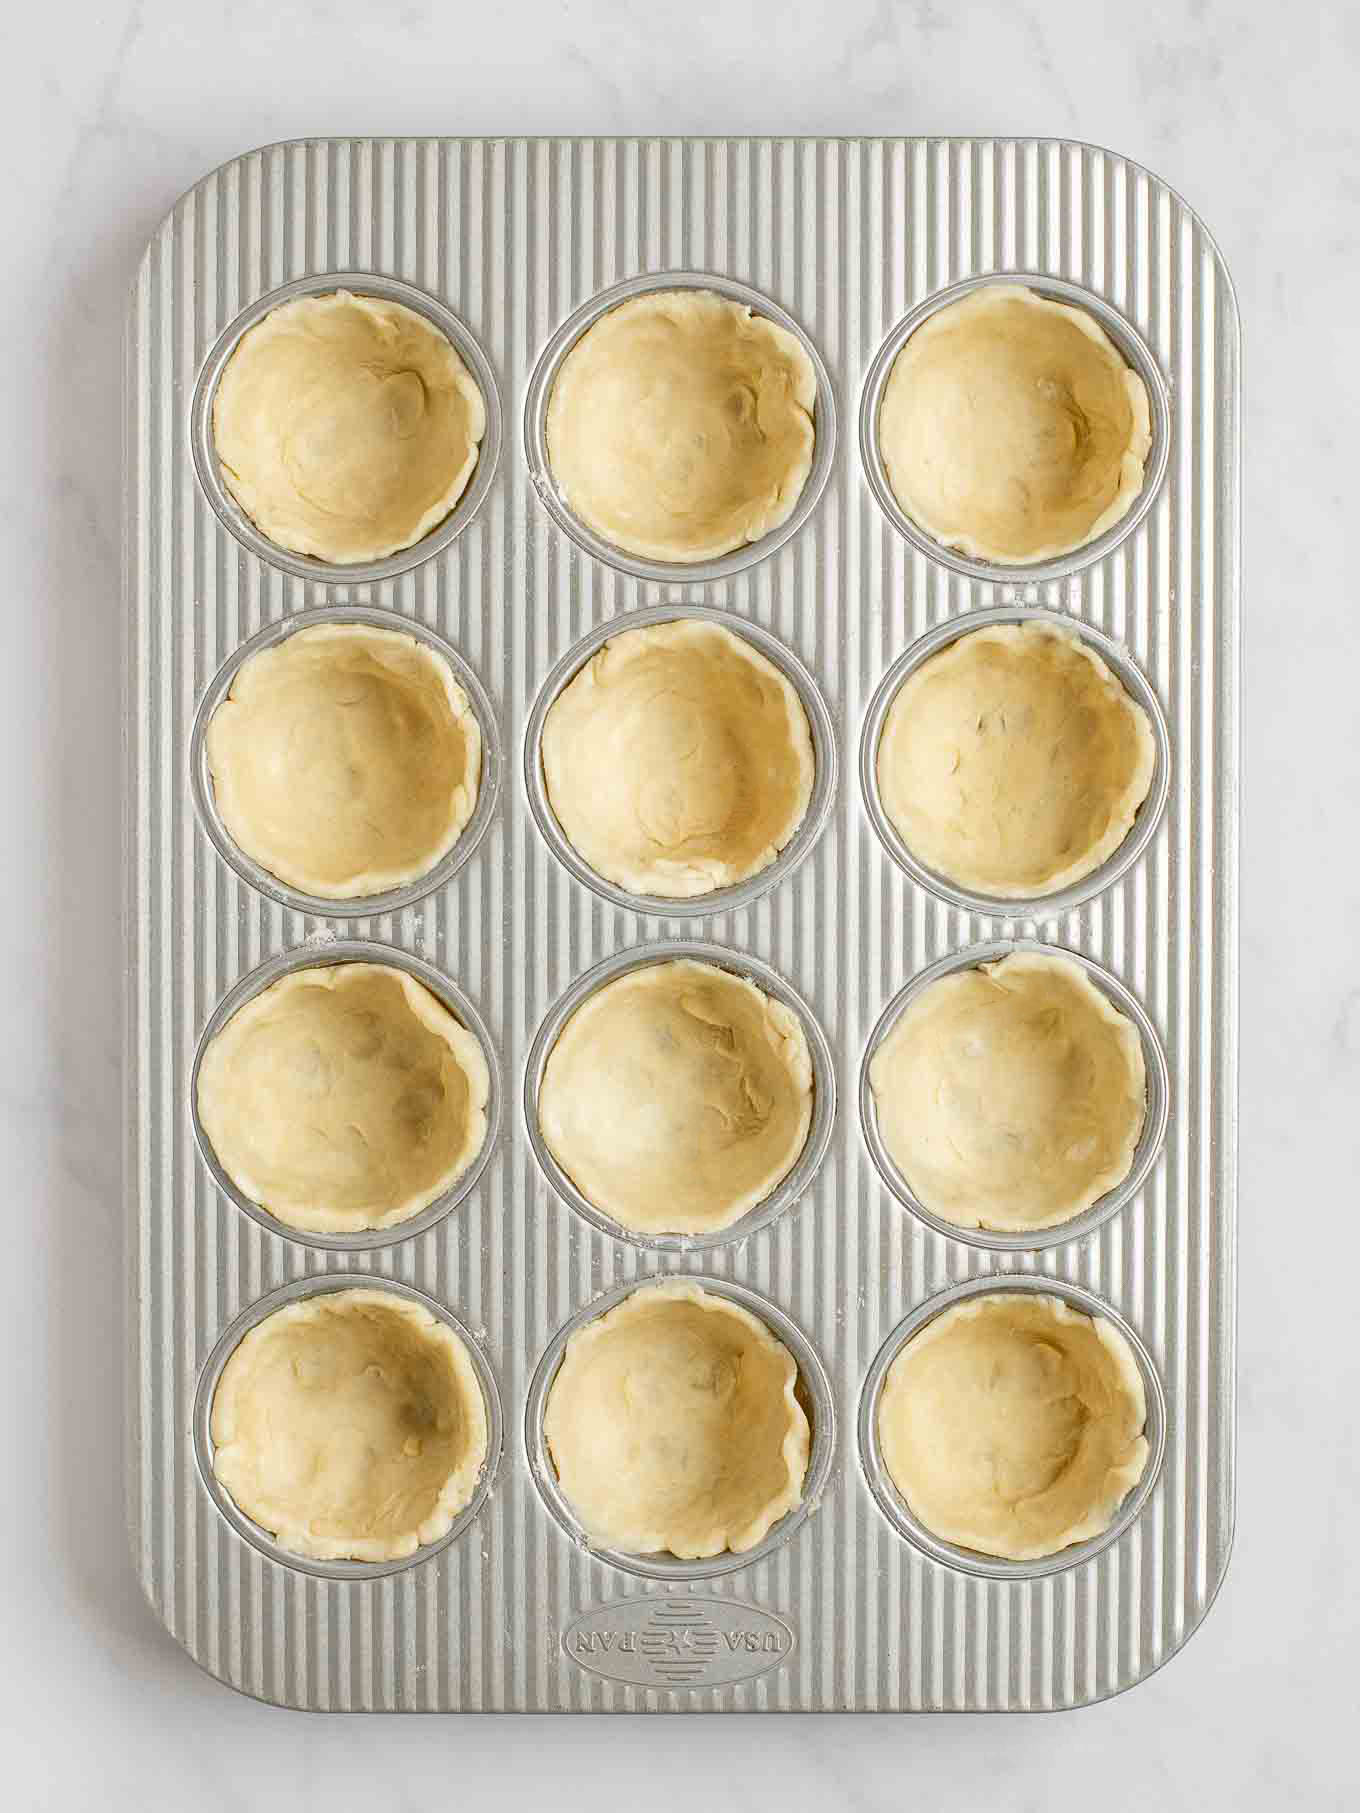 An overhead view of pie crust circles pressed into the cavities of a muffin pan.